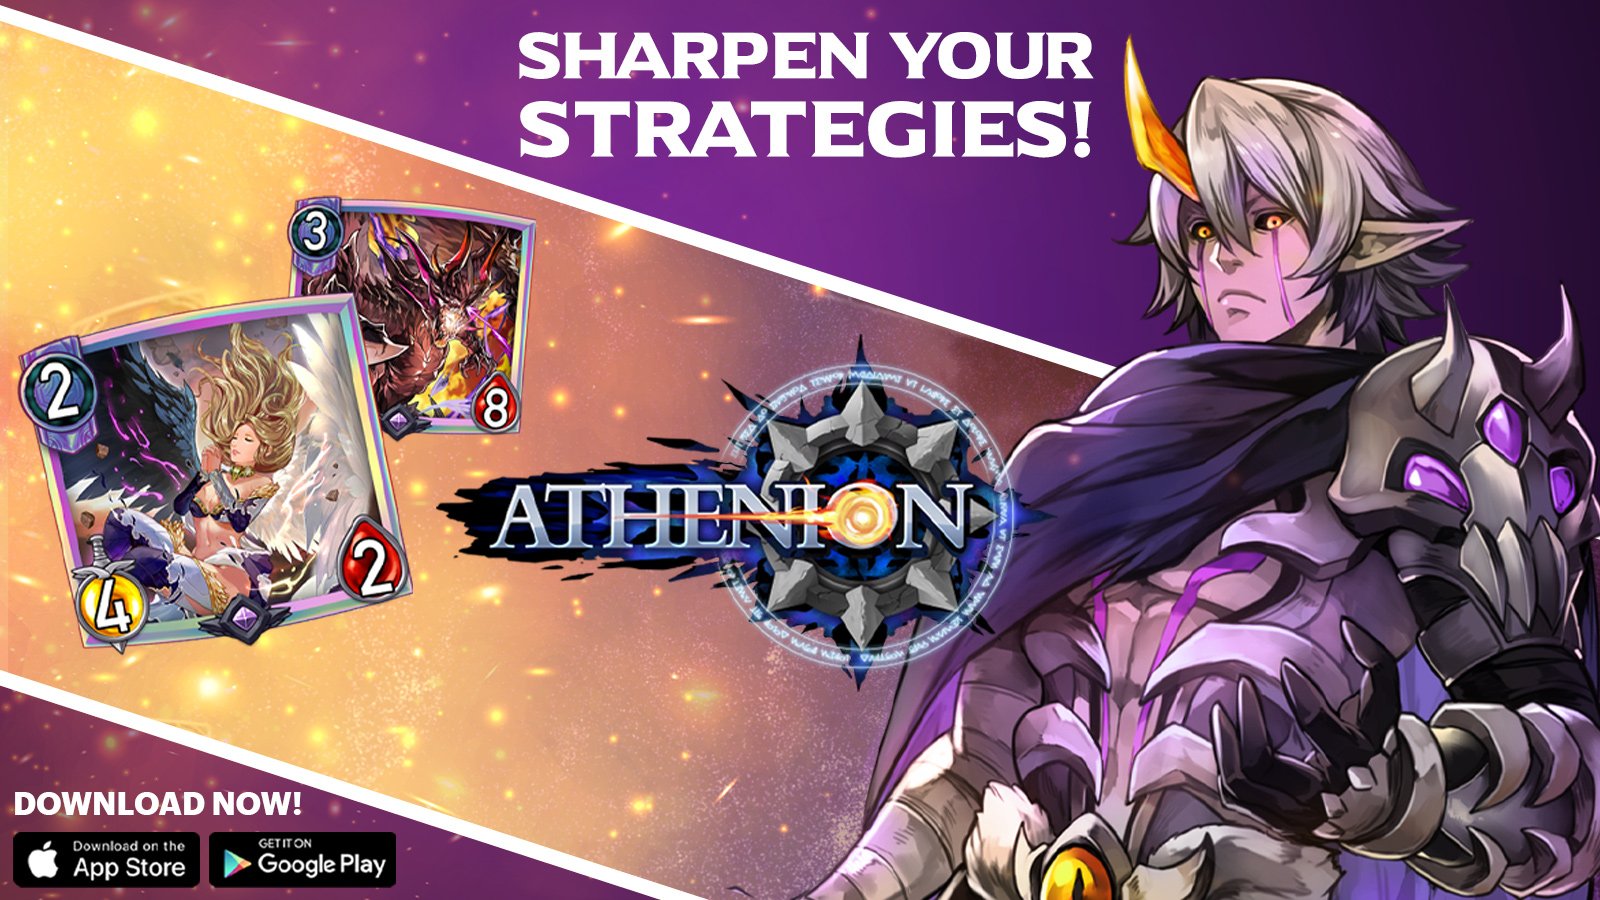 Athenion: Tactical CCG Guide – Build the Perfect Deck and More With These Hints, Tips and Tricks